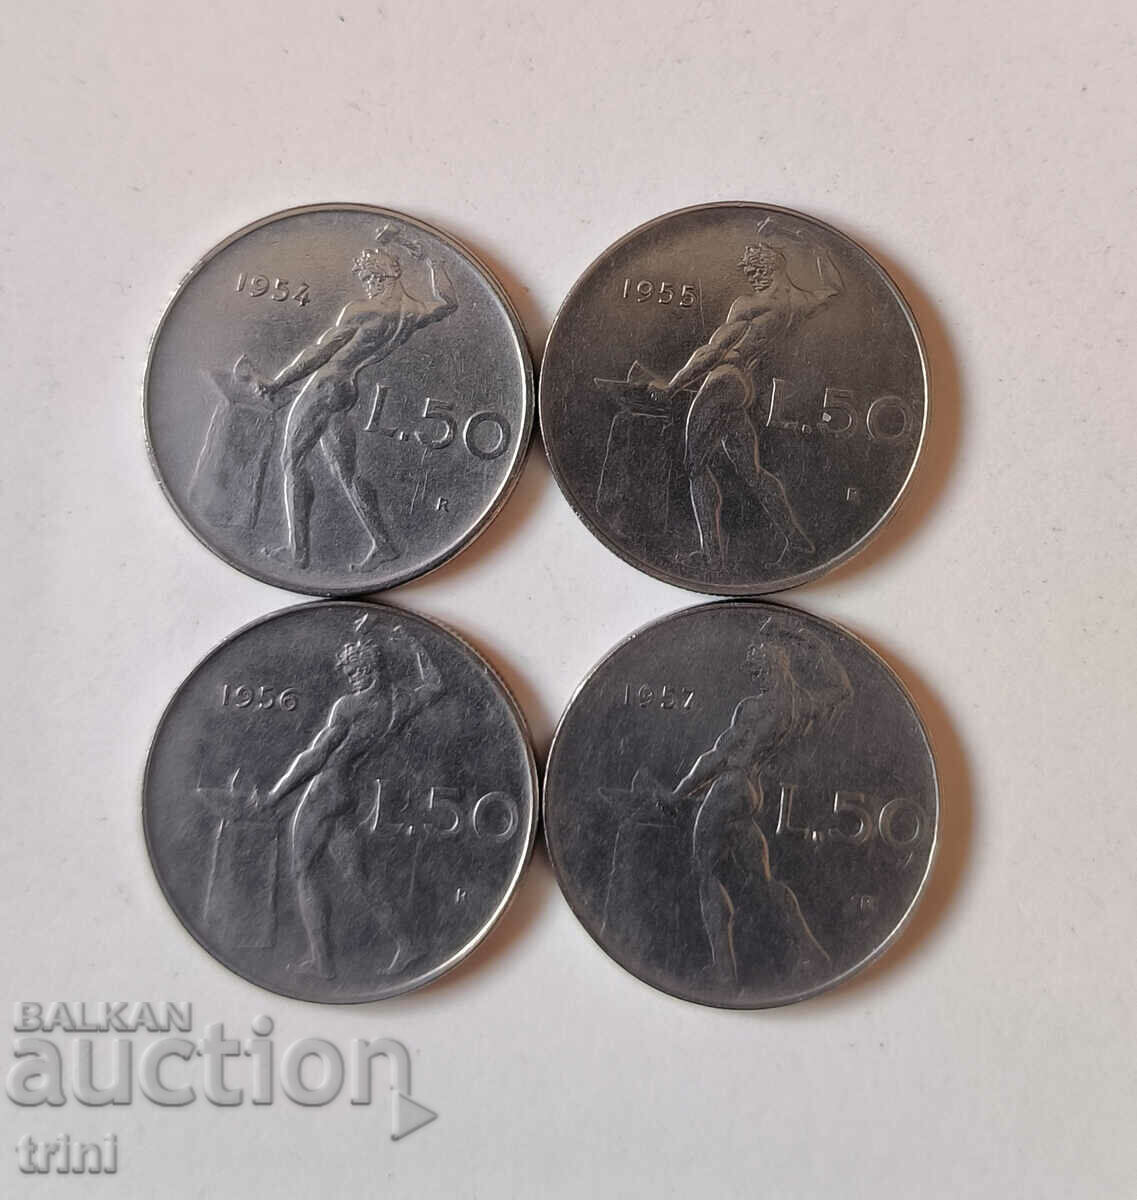 Italy lot 50 lira 1954, 1955, 1956 and 1957 year a2